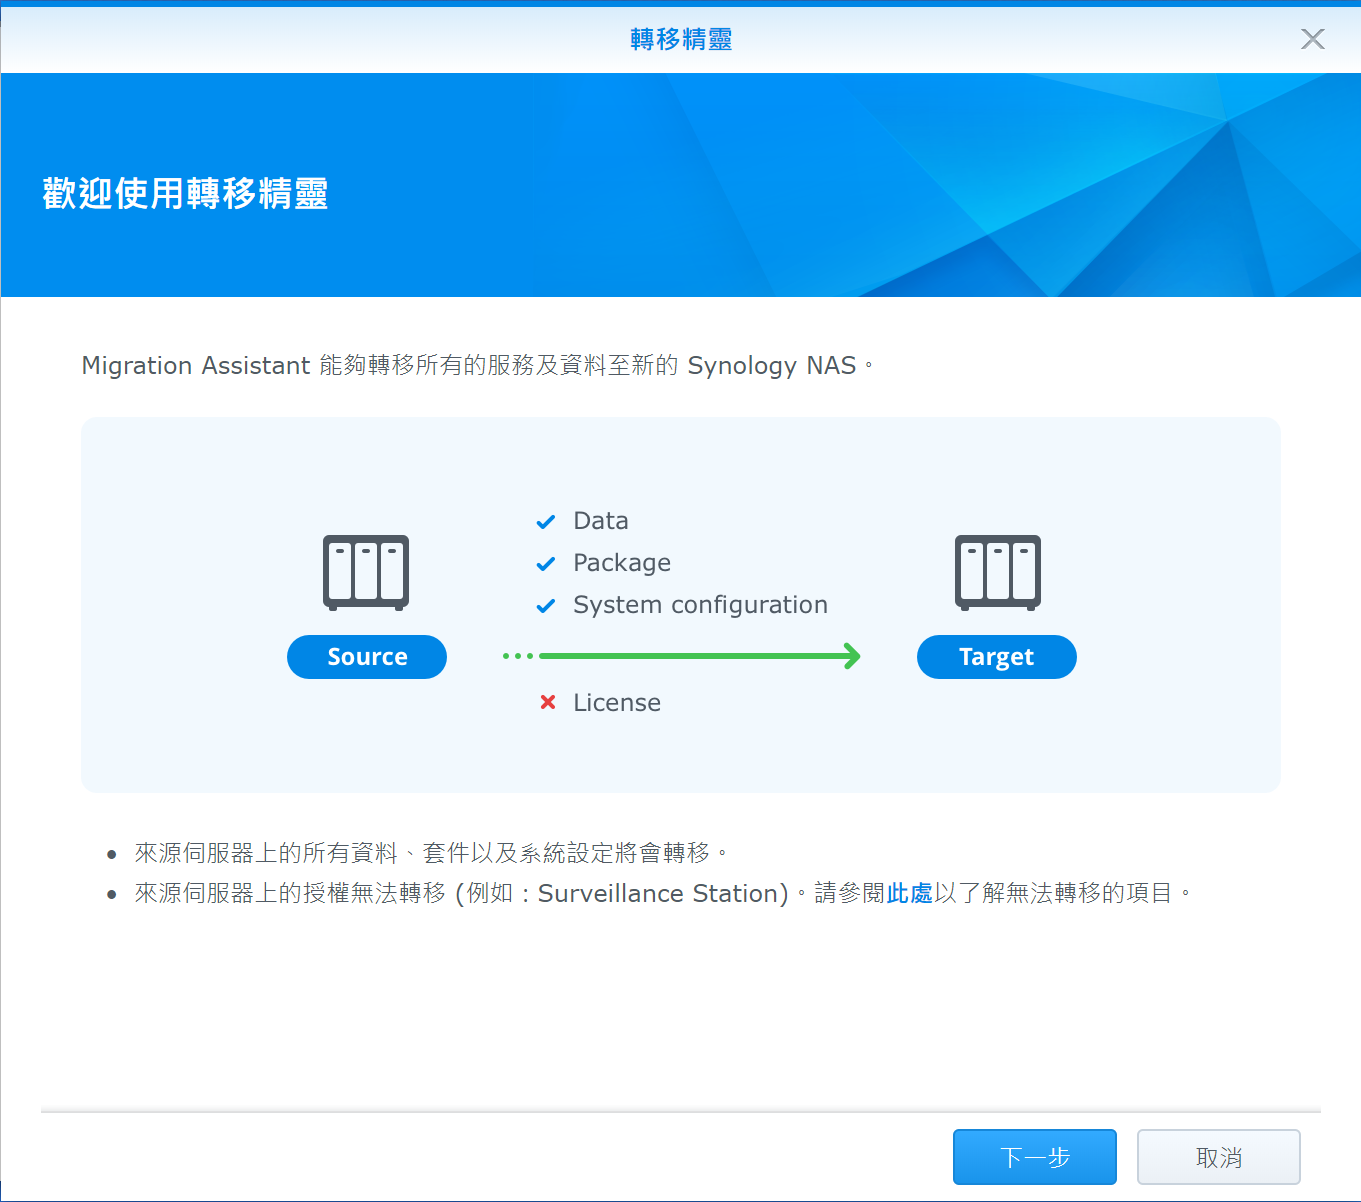 Synology Migration Assistant